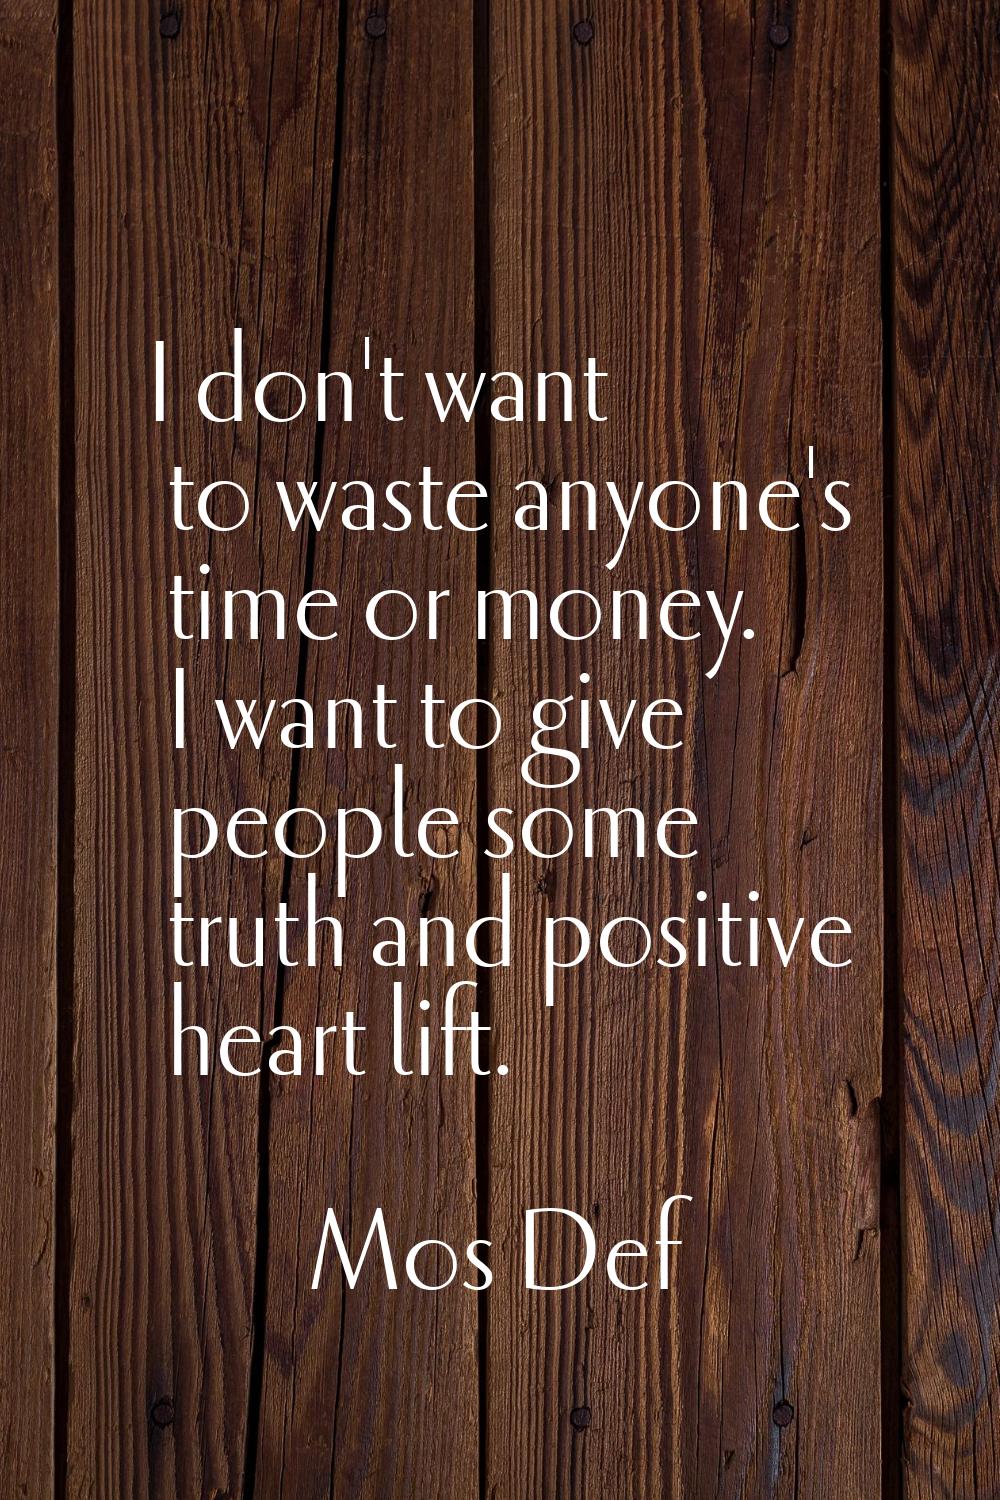 I don't want to waste anyone's time or money. I want to give people some truth and positive heart l